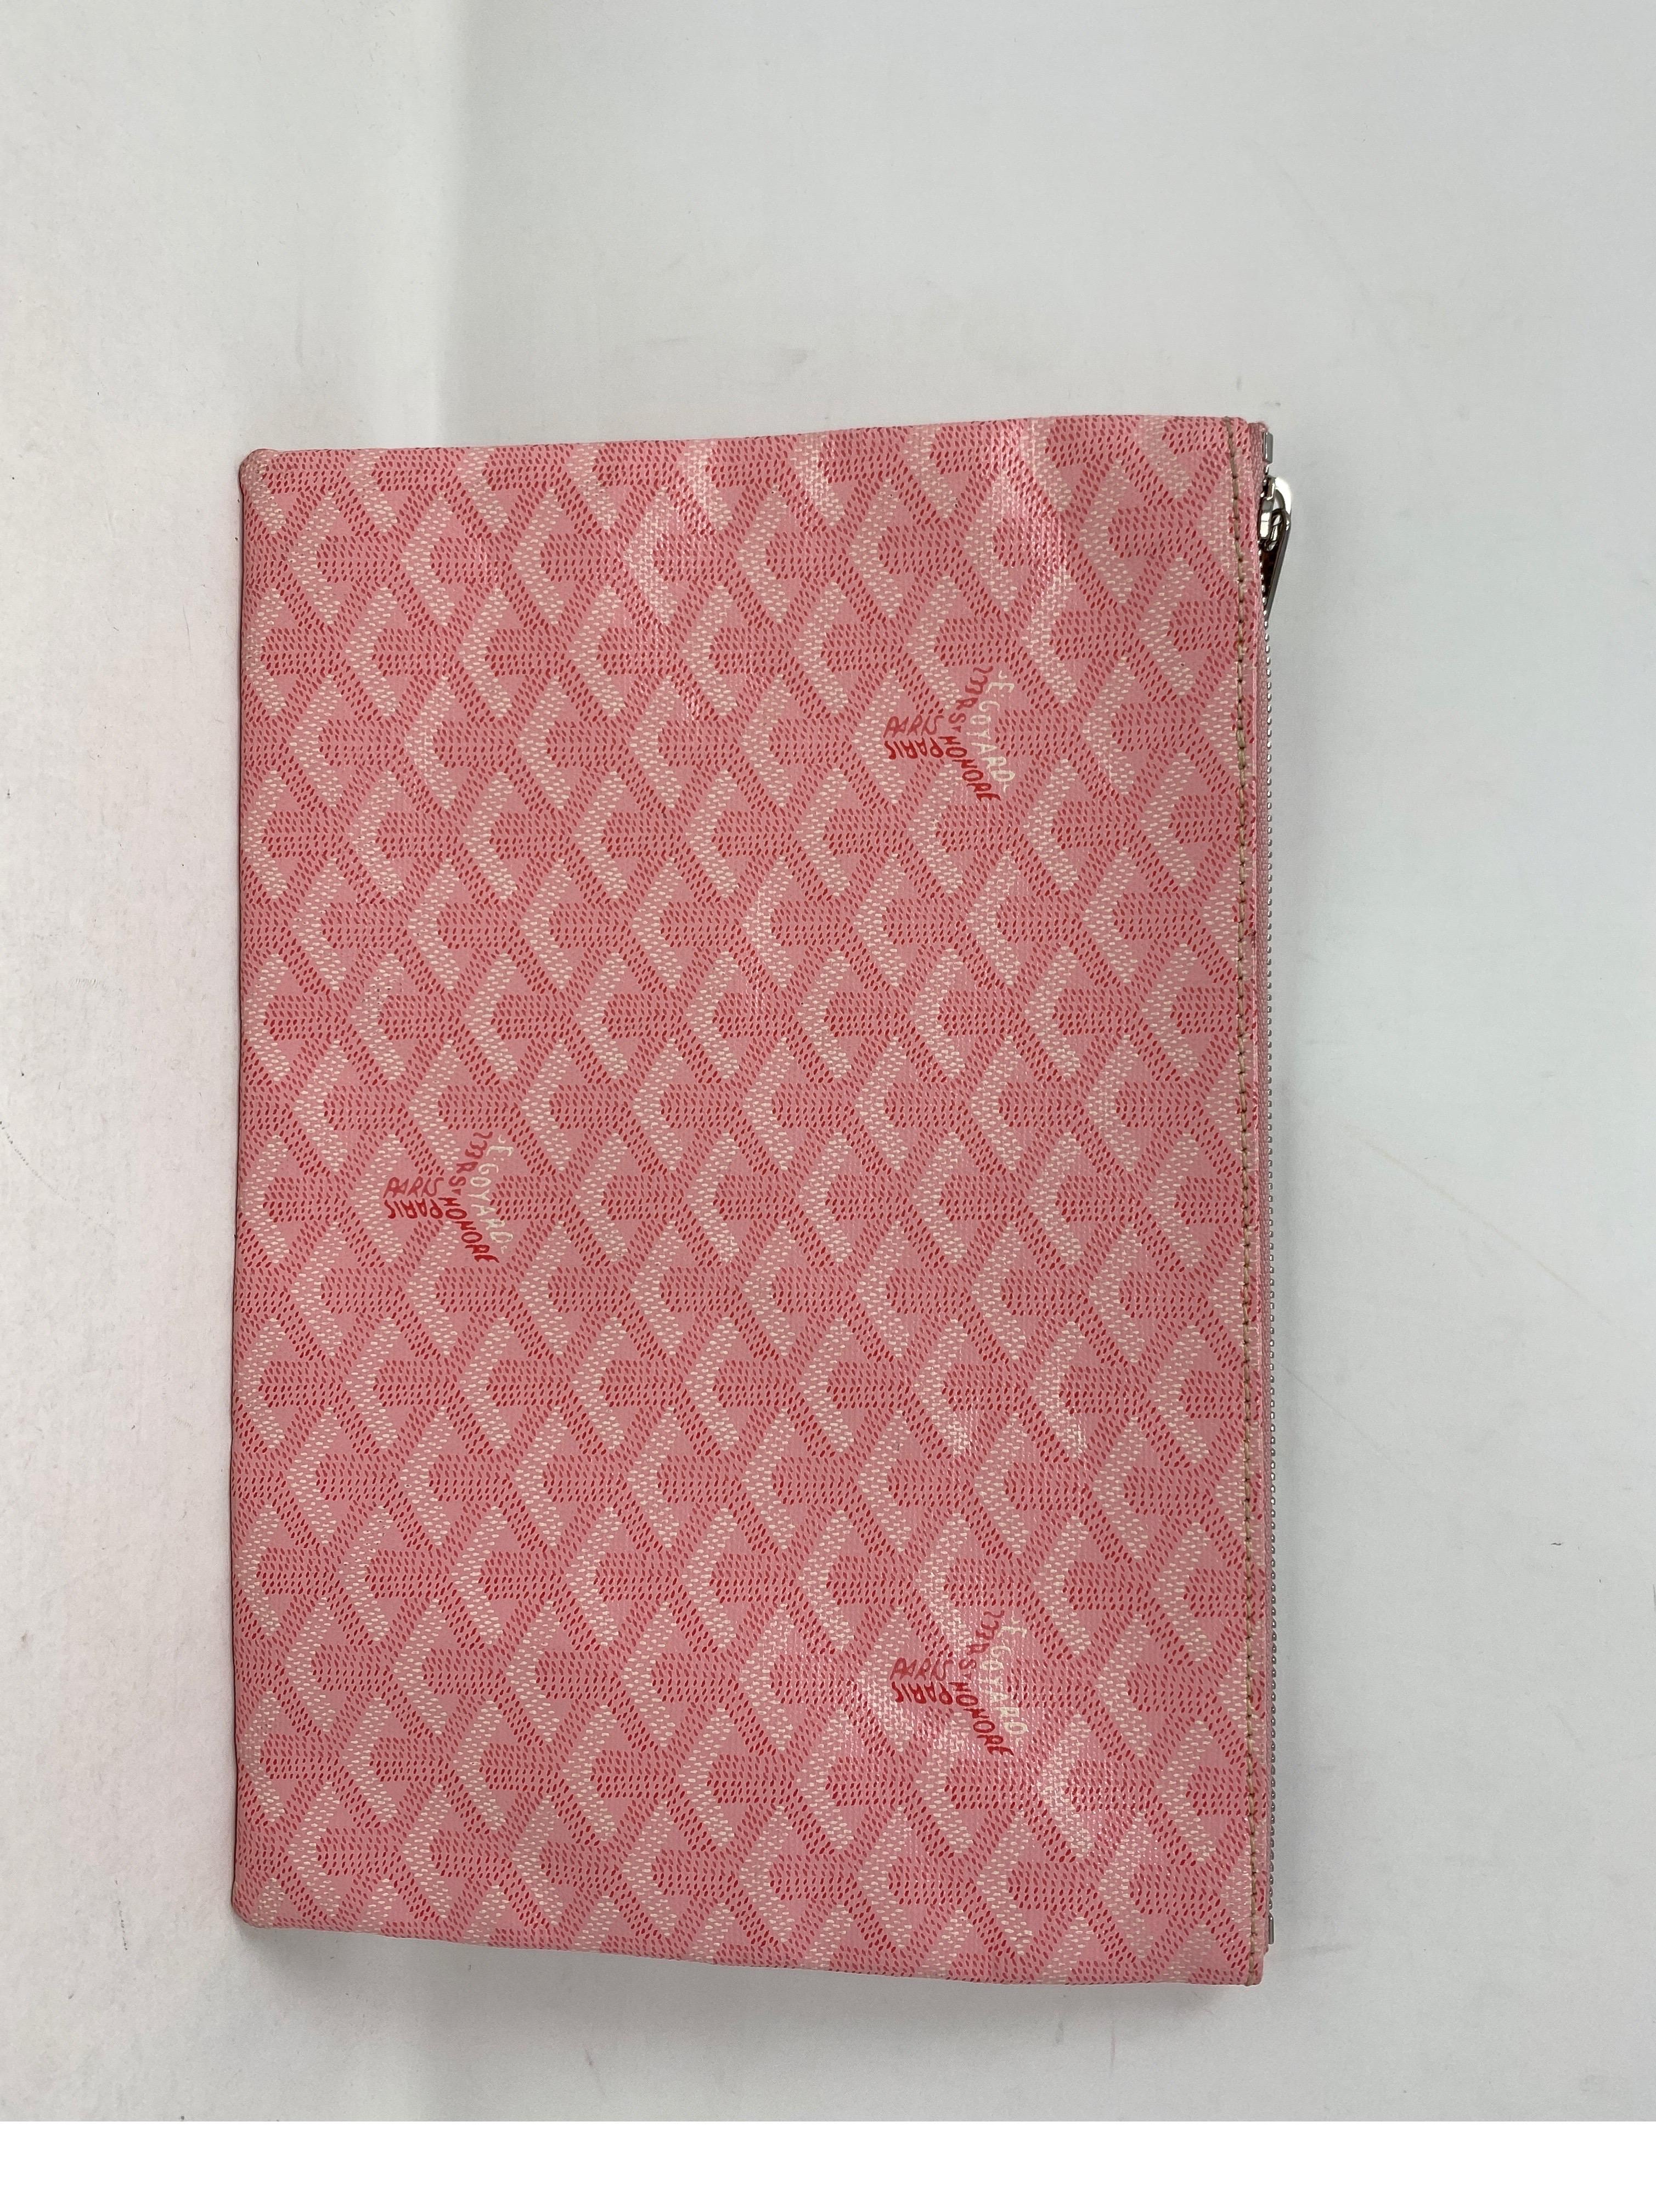 Goyard Pink Clutch. Pretty pastel pink. Silver hardware. Mint like new condition. Cute clutch or accessory. Guaranteed authentic. 